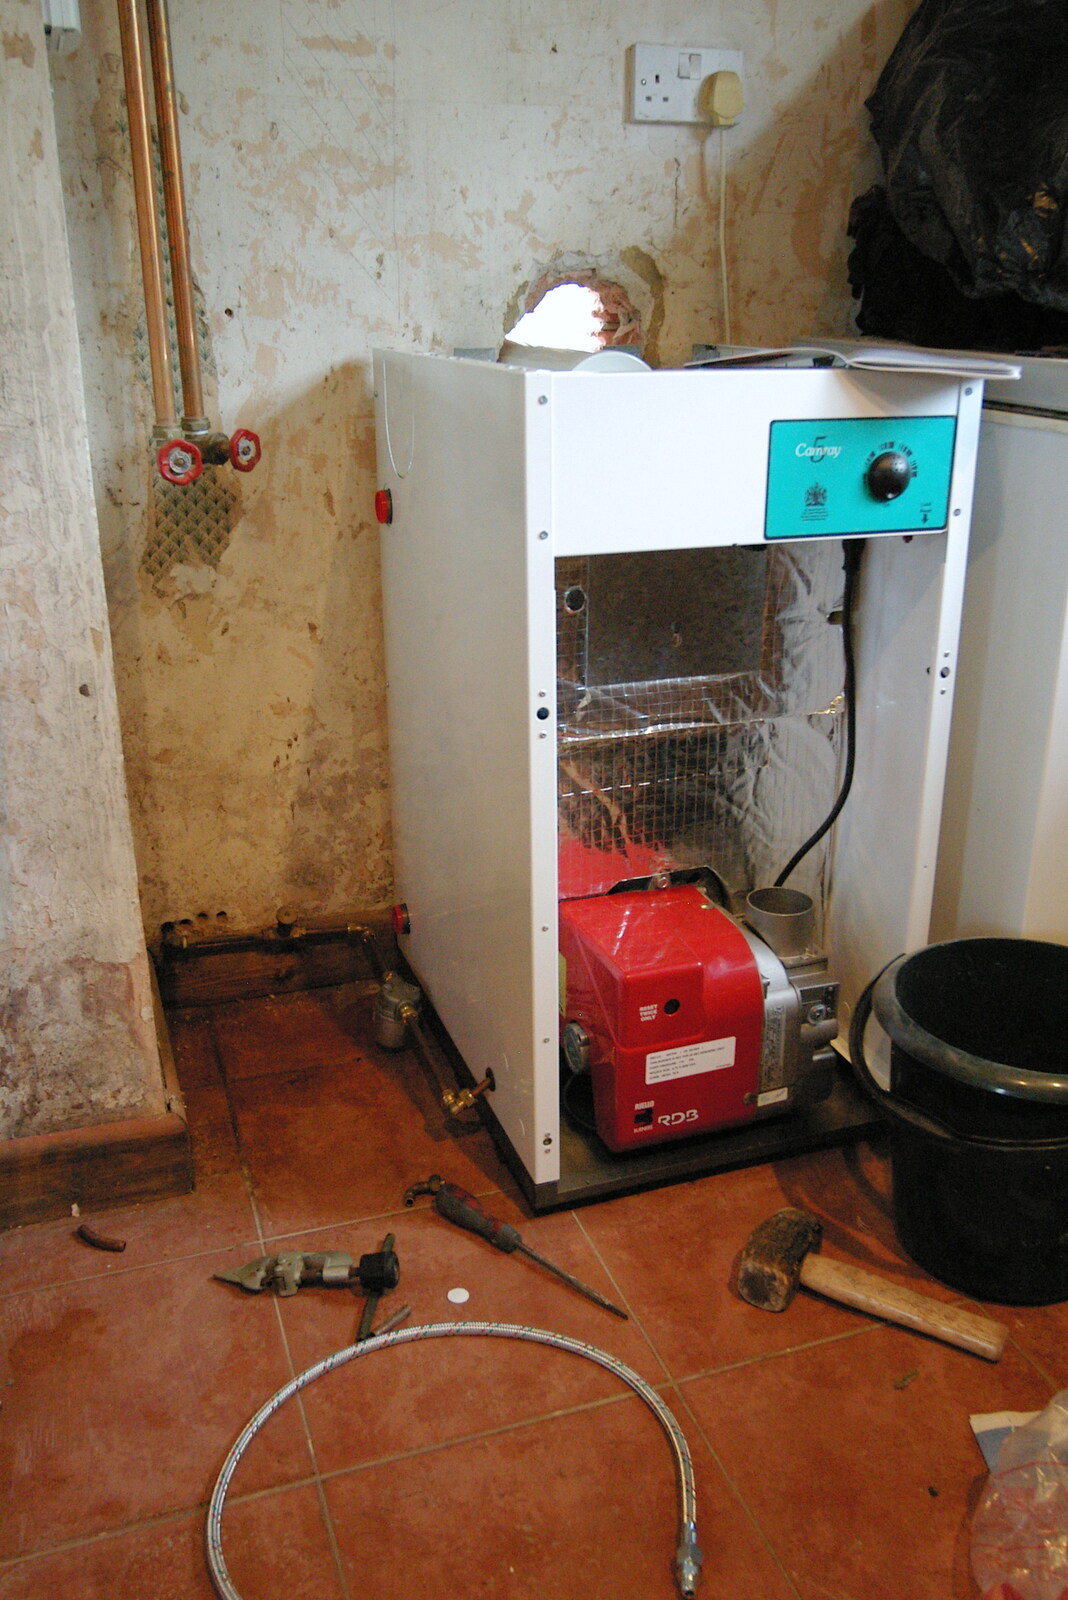 So a new boiler is installed from Life on the Neonatal Ward, Dairy Farm and Thrandeston Chapel, Suffolk - 26th August 2005